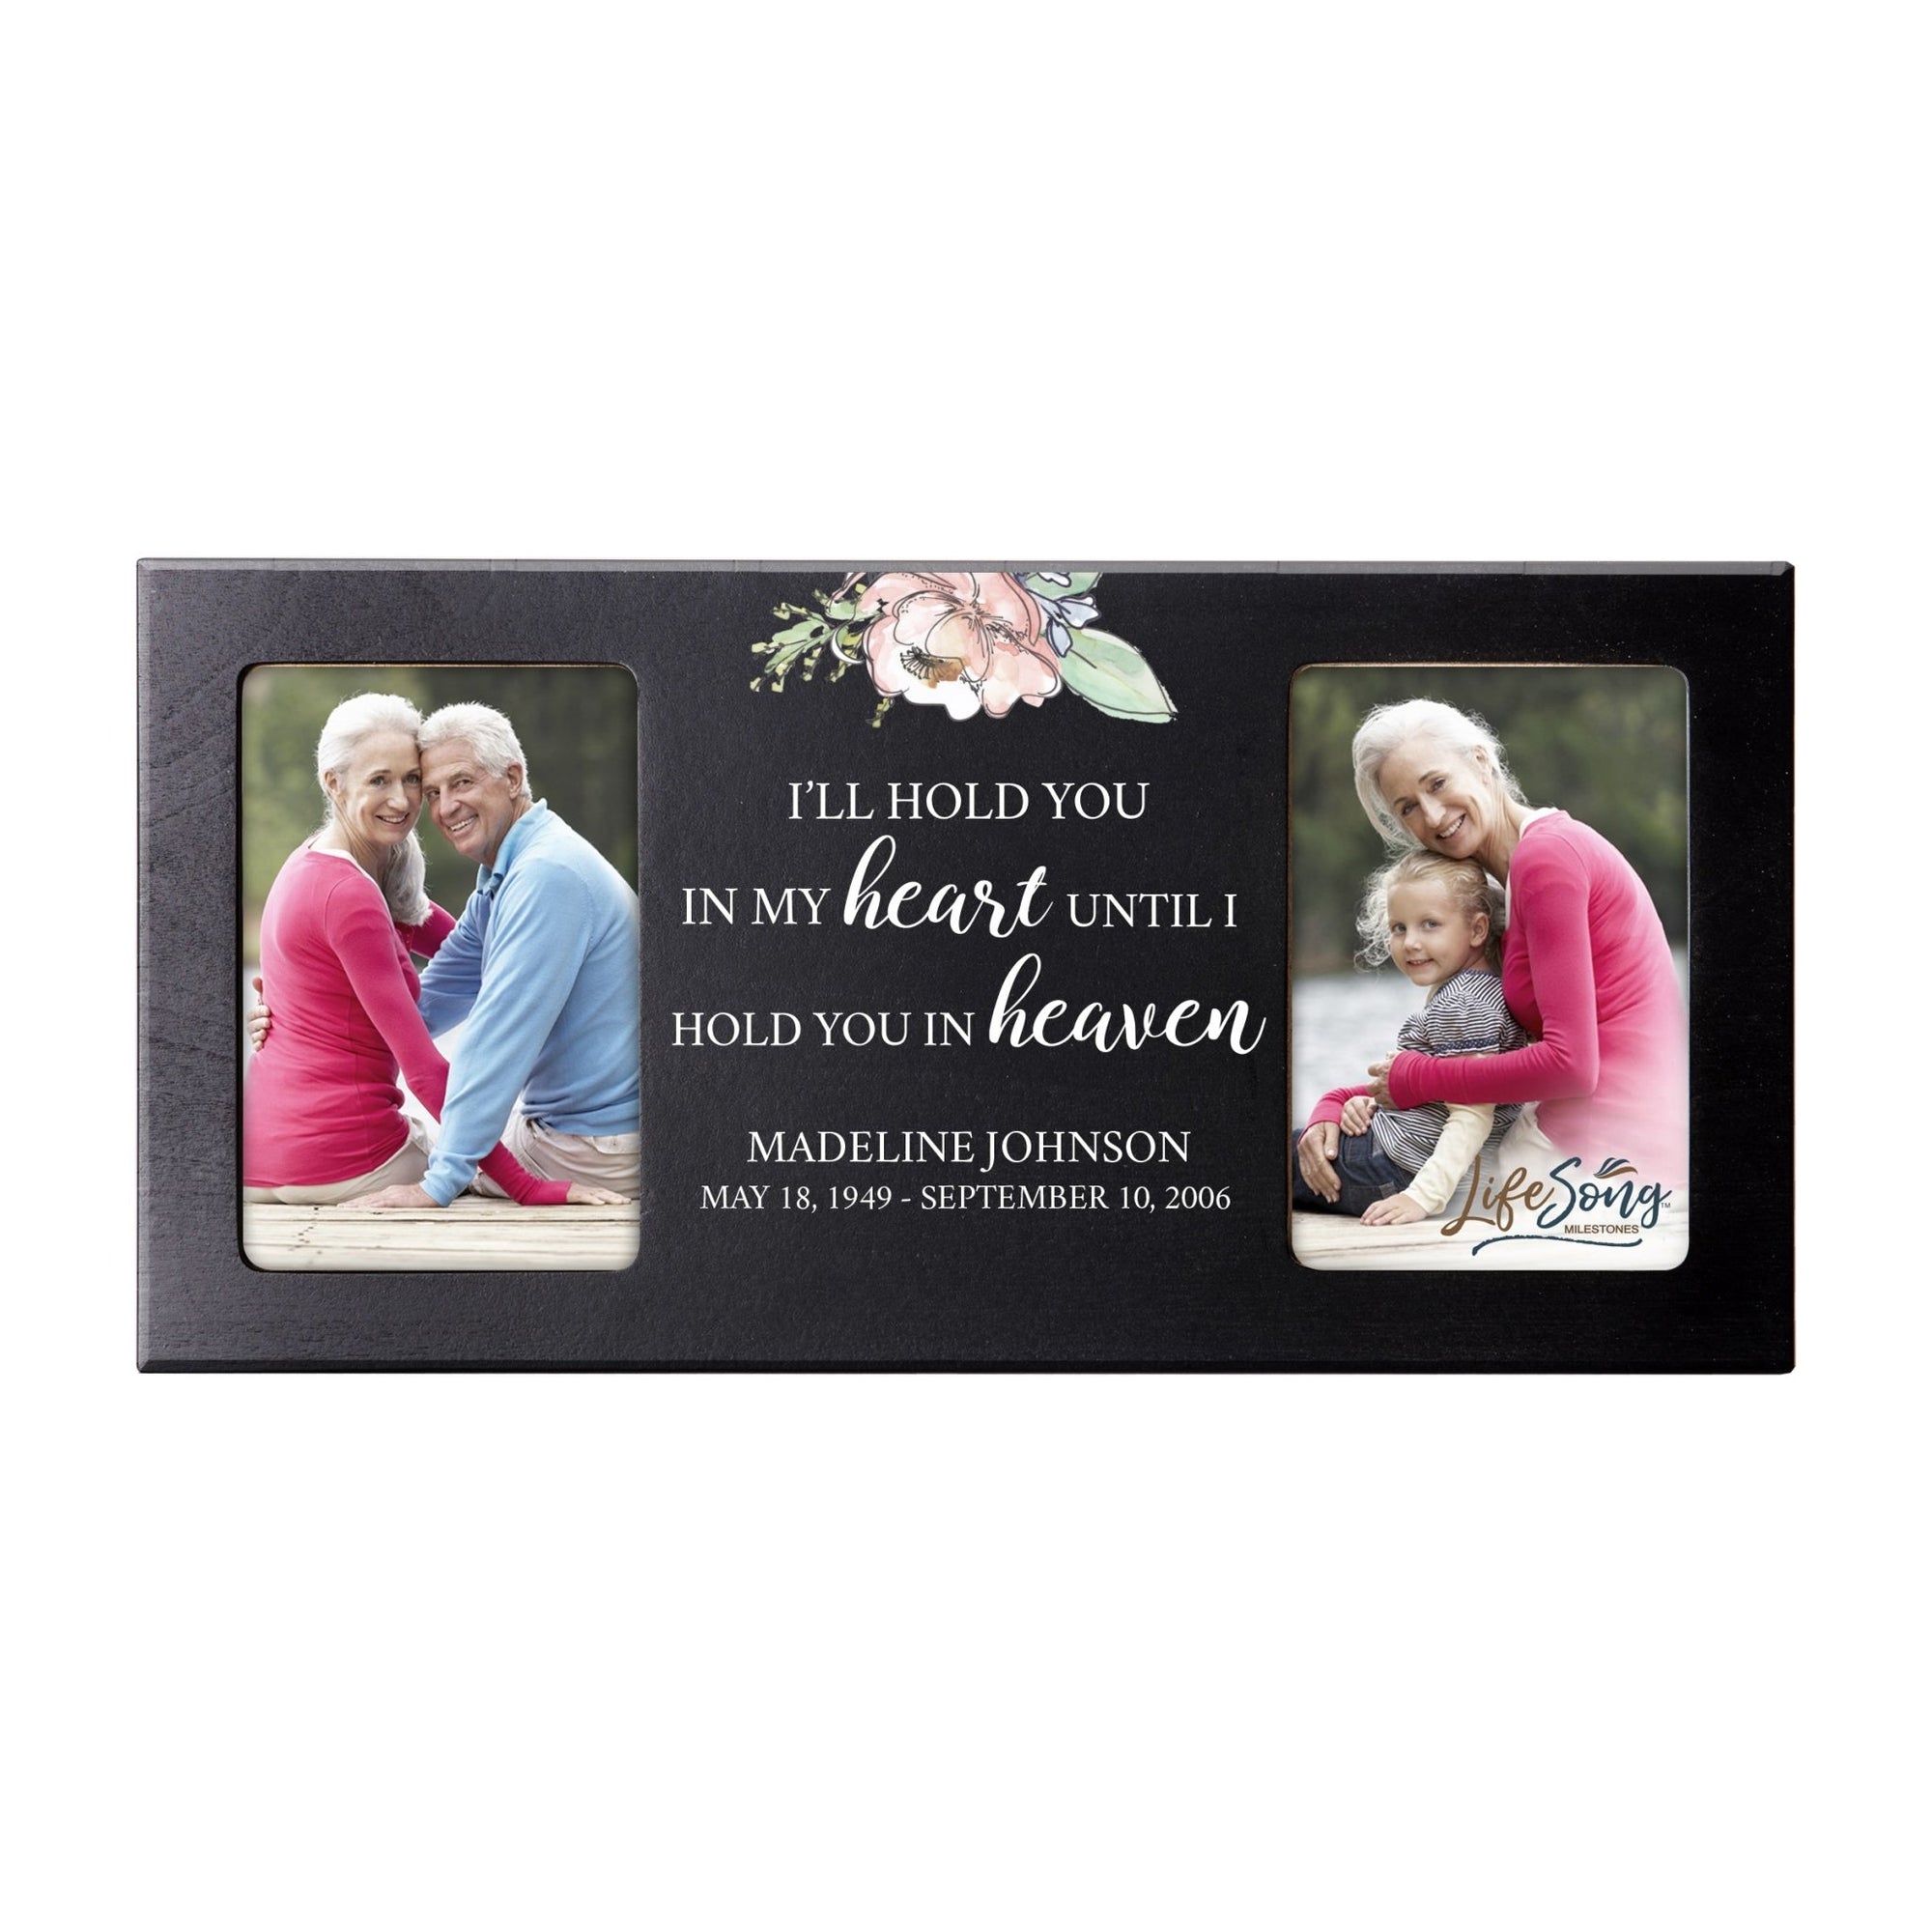 Custom Memorial Picture Frame 16x8in Holds Two 4x6in Photos - I’ll Hold You In My - LifeSong Milestones